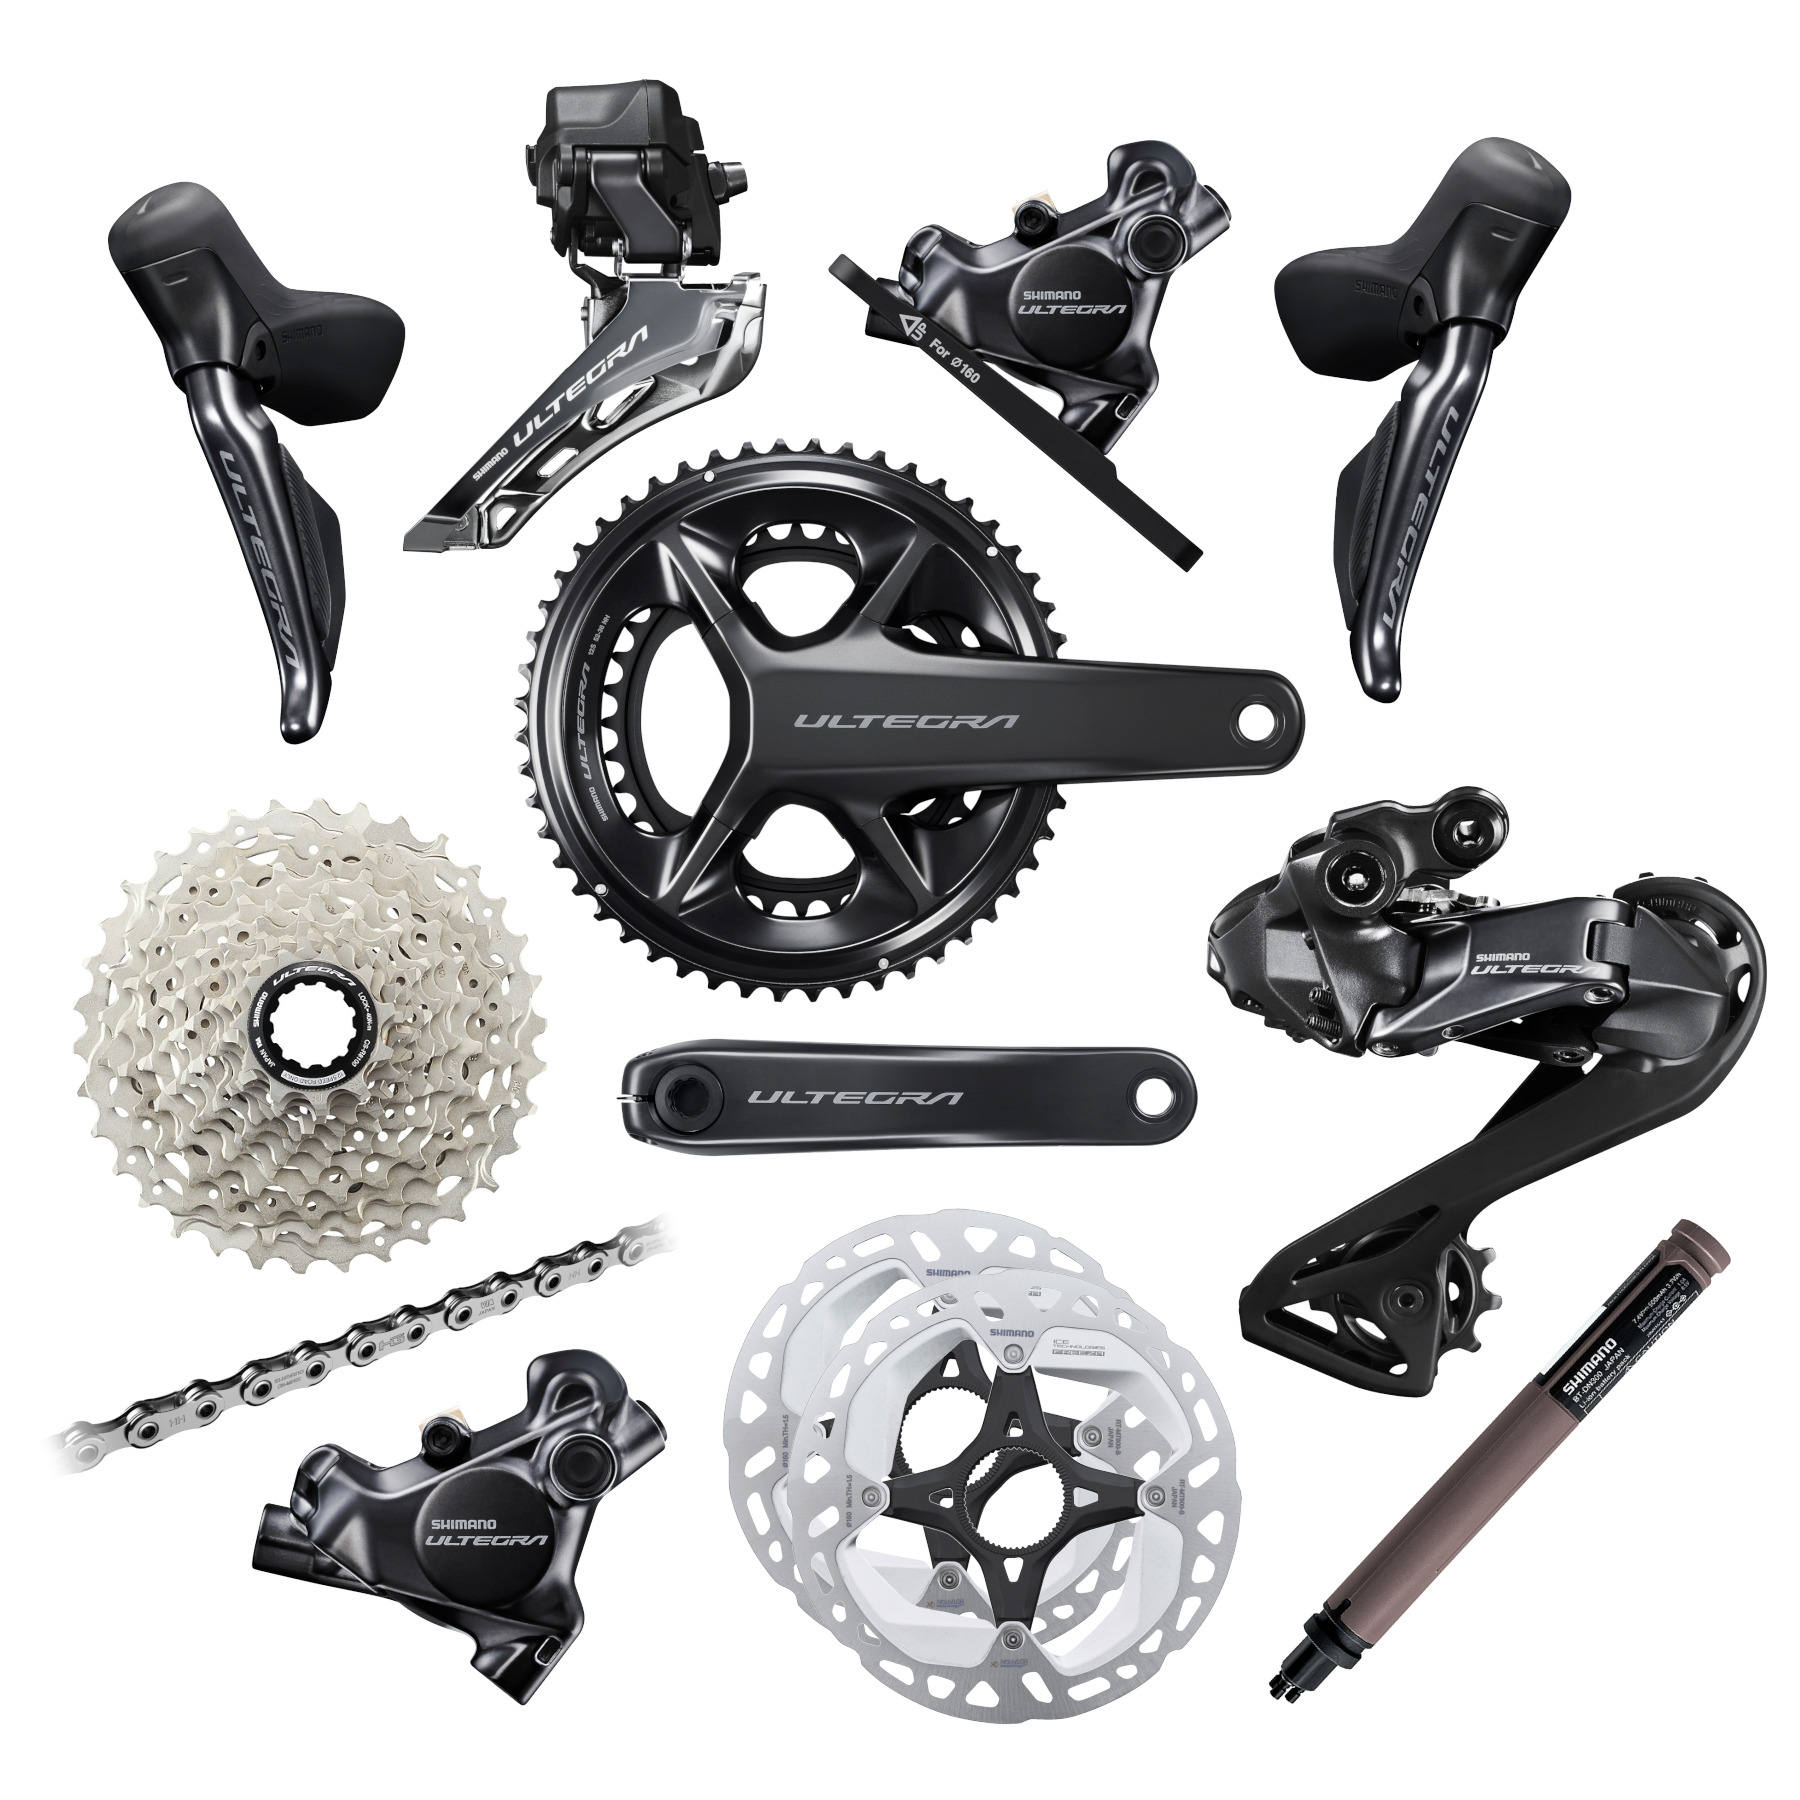 Picture of Shimano Ultegra Di2 R8100 Groupset - 2x12-speed